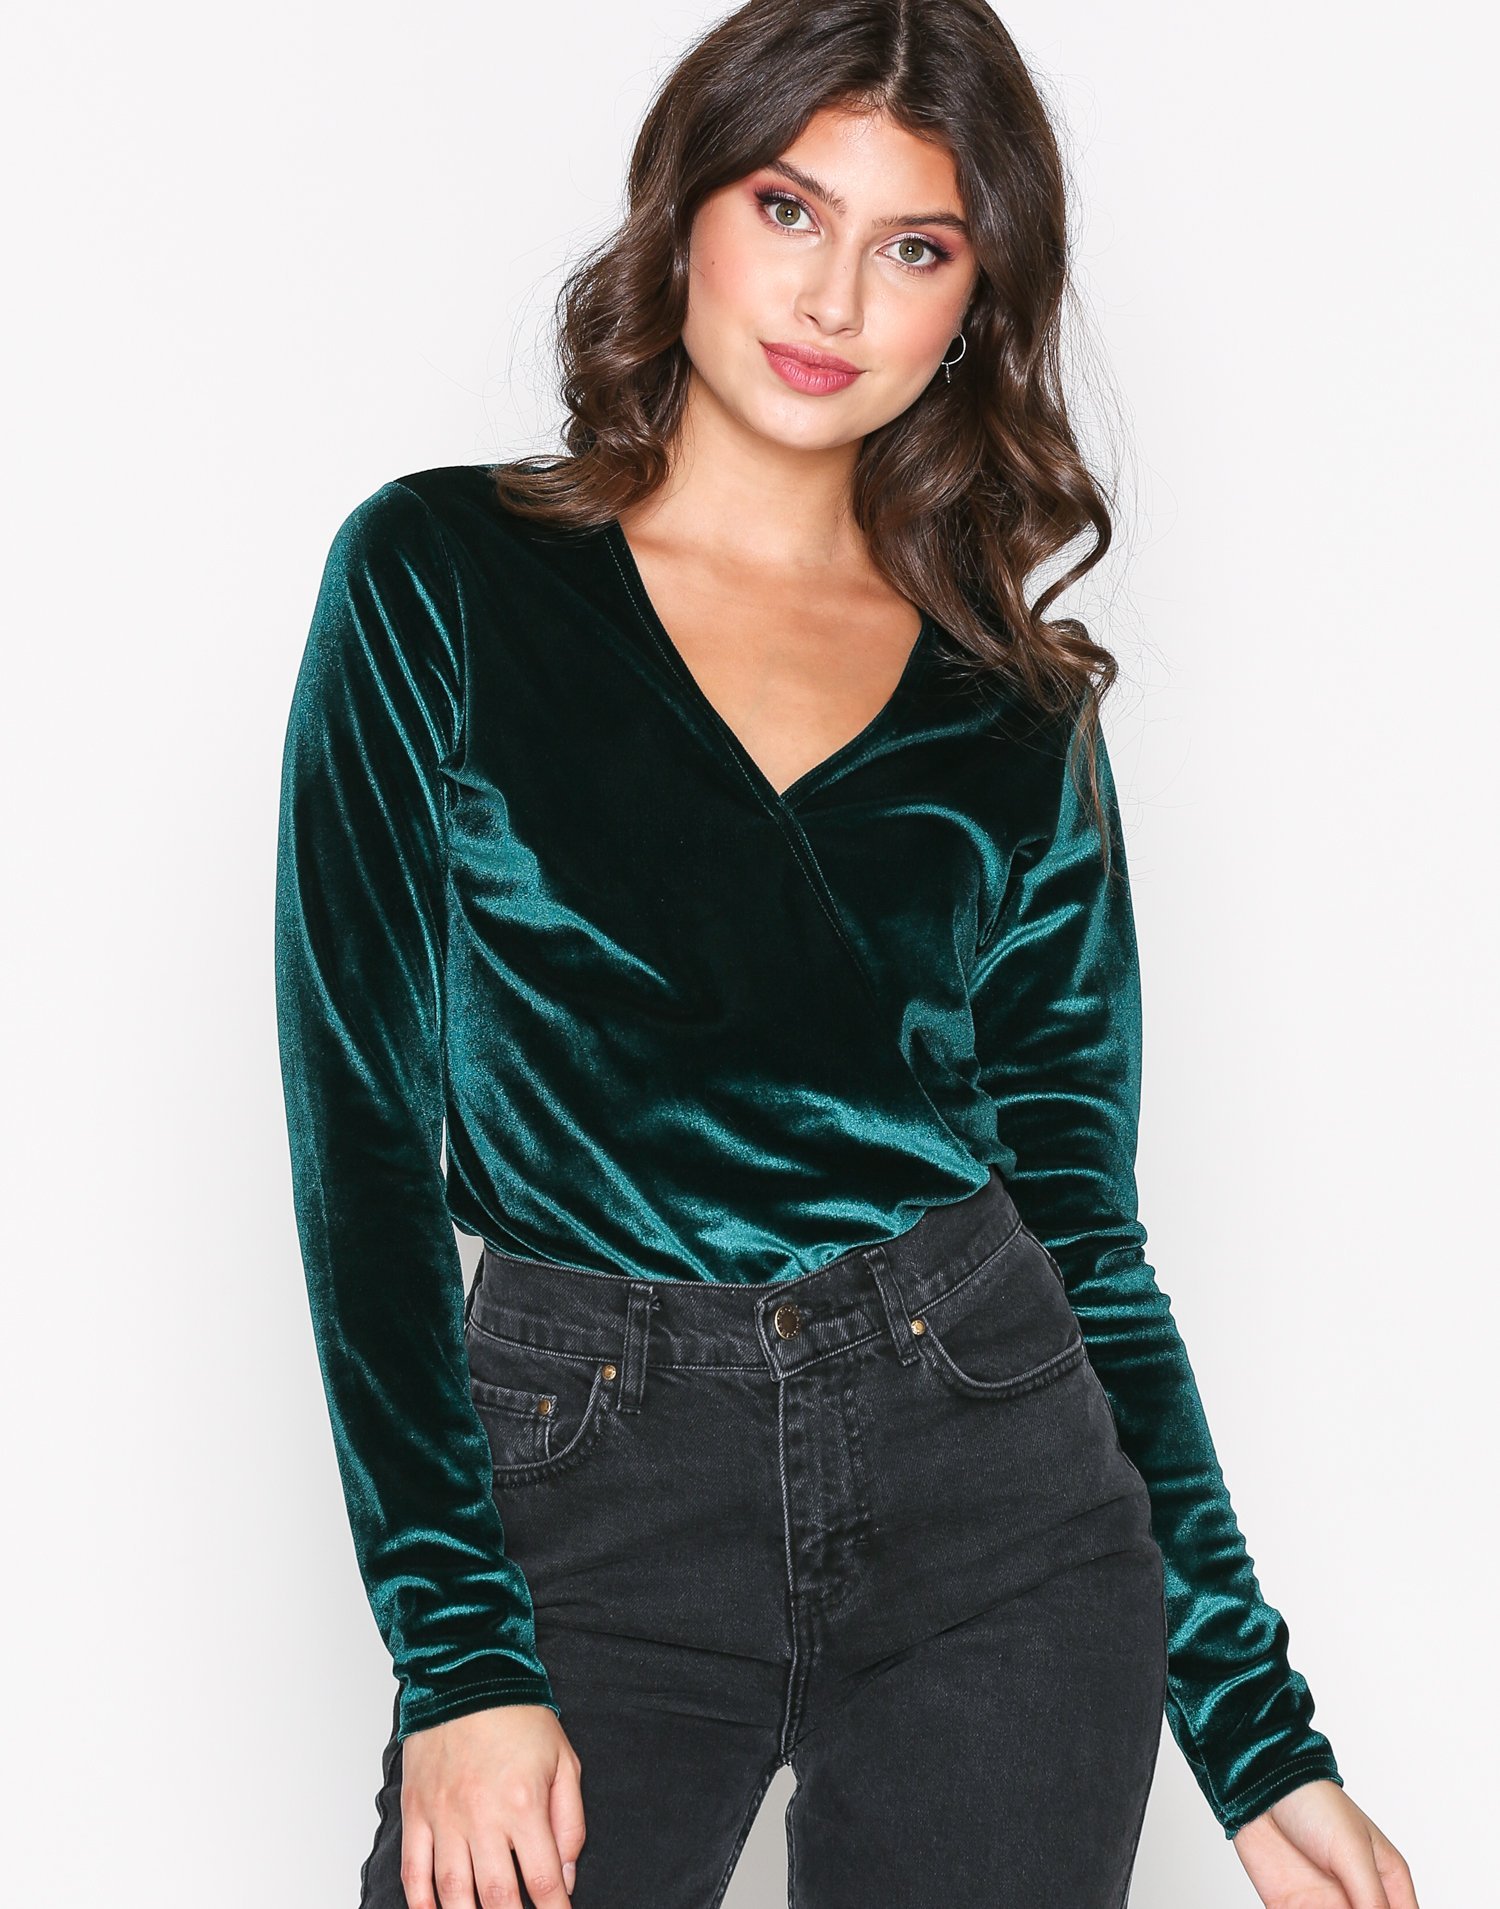 Wrapped Velvet Top - Nly Trend - Green - Tops - Clothing - Women - Nelly.com